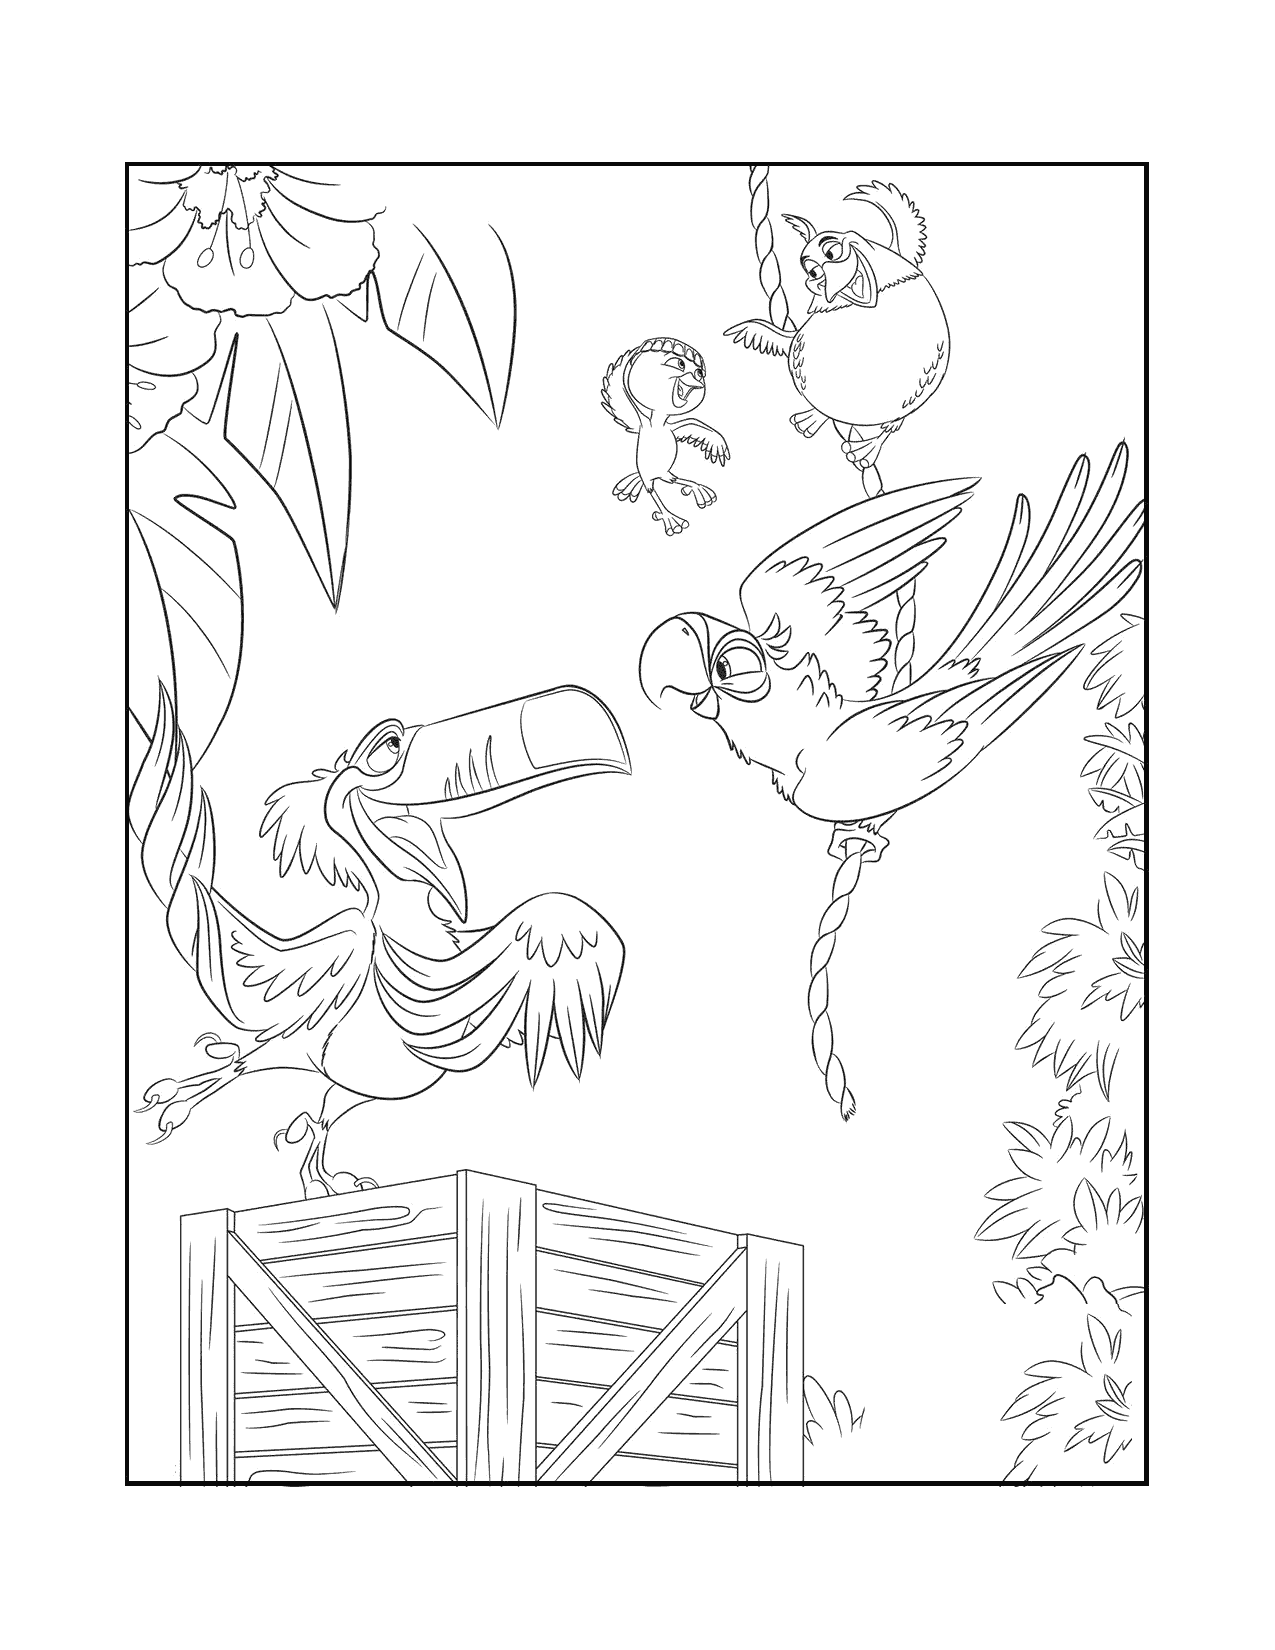 Rafael And Nico Rio Coloring Pages